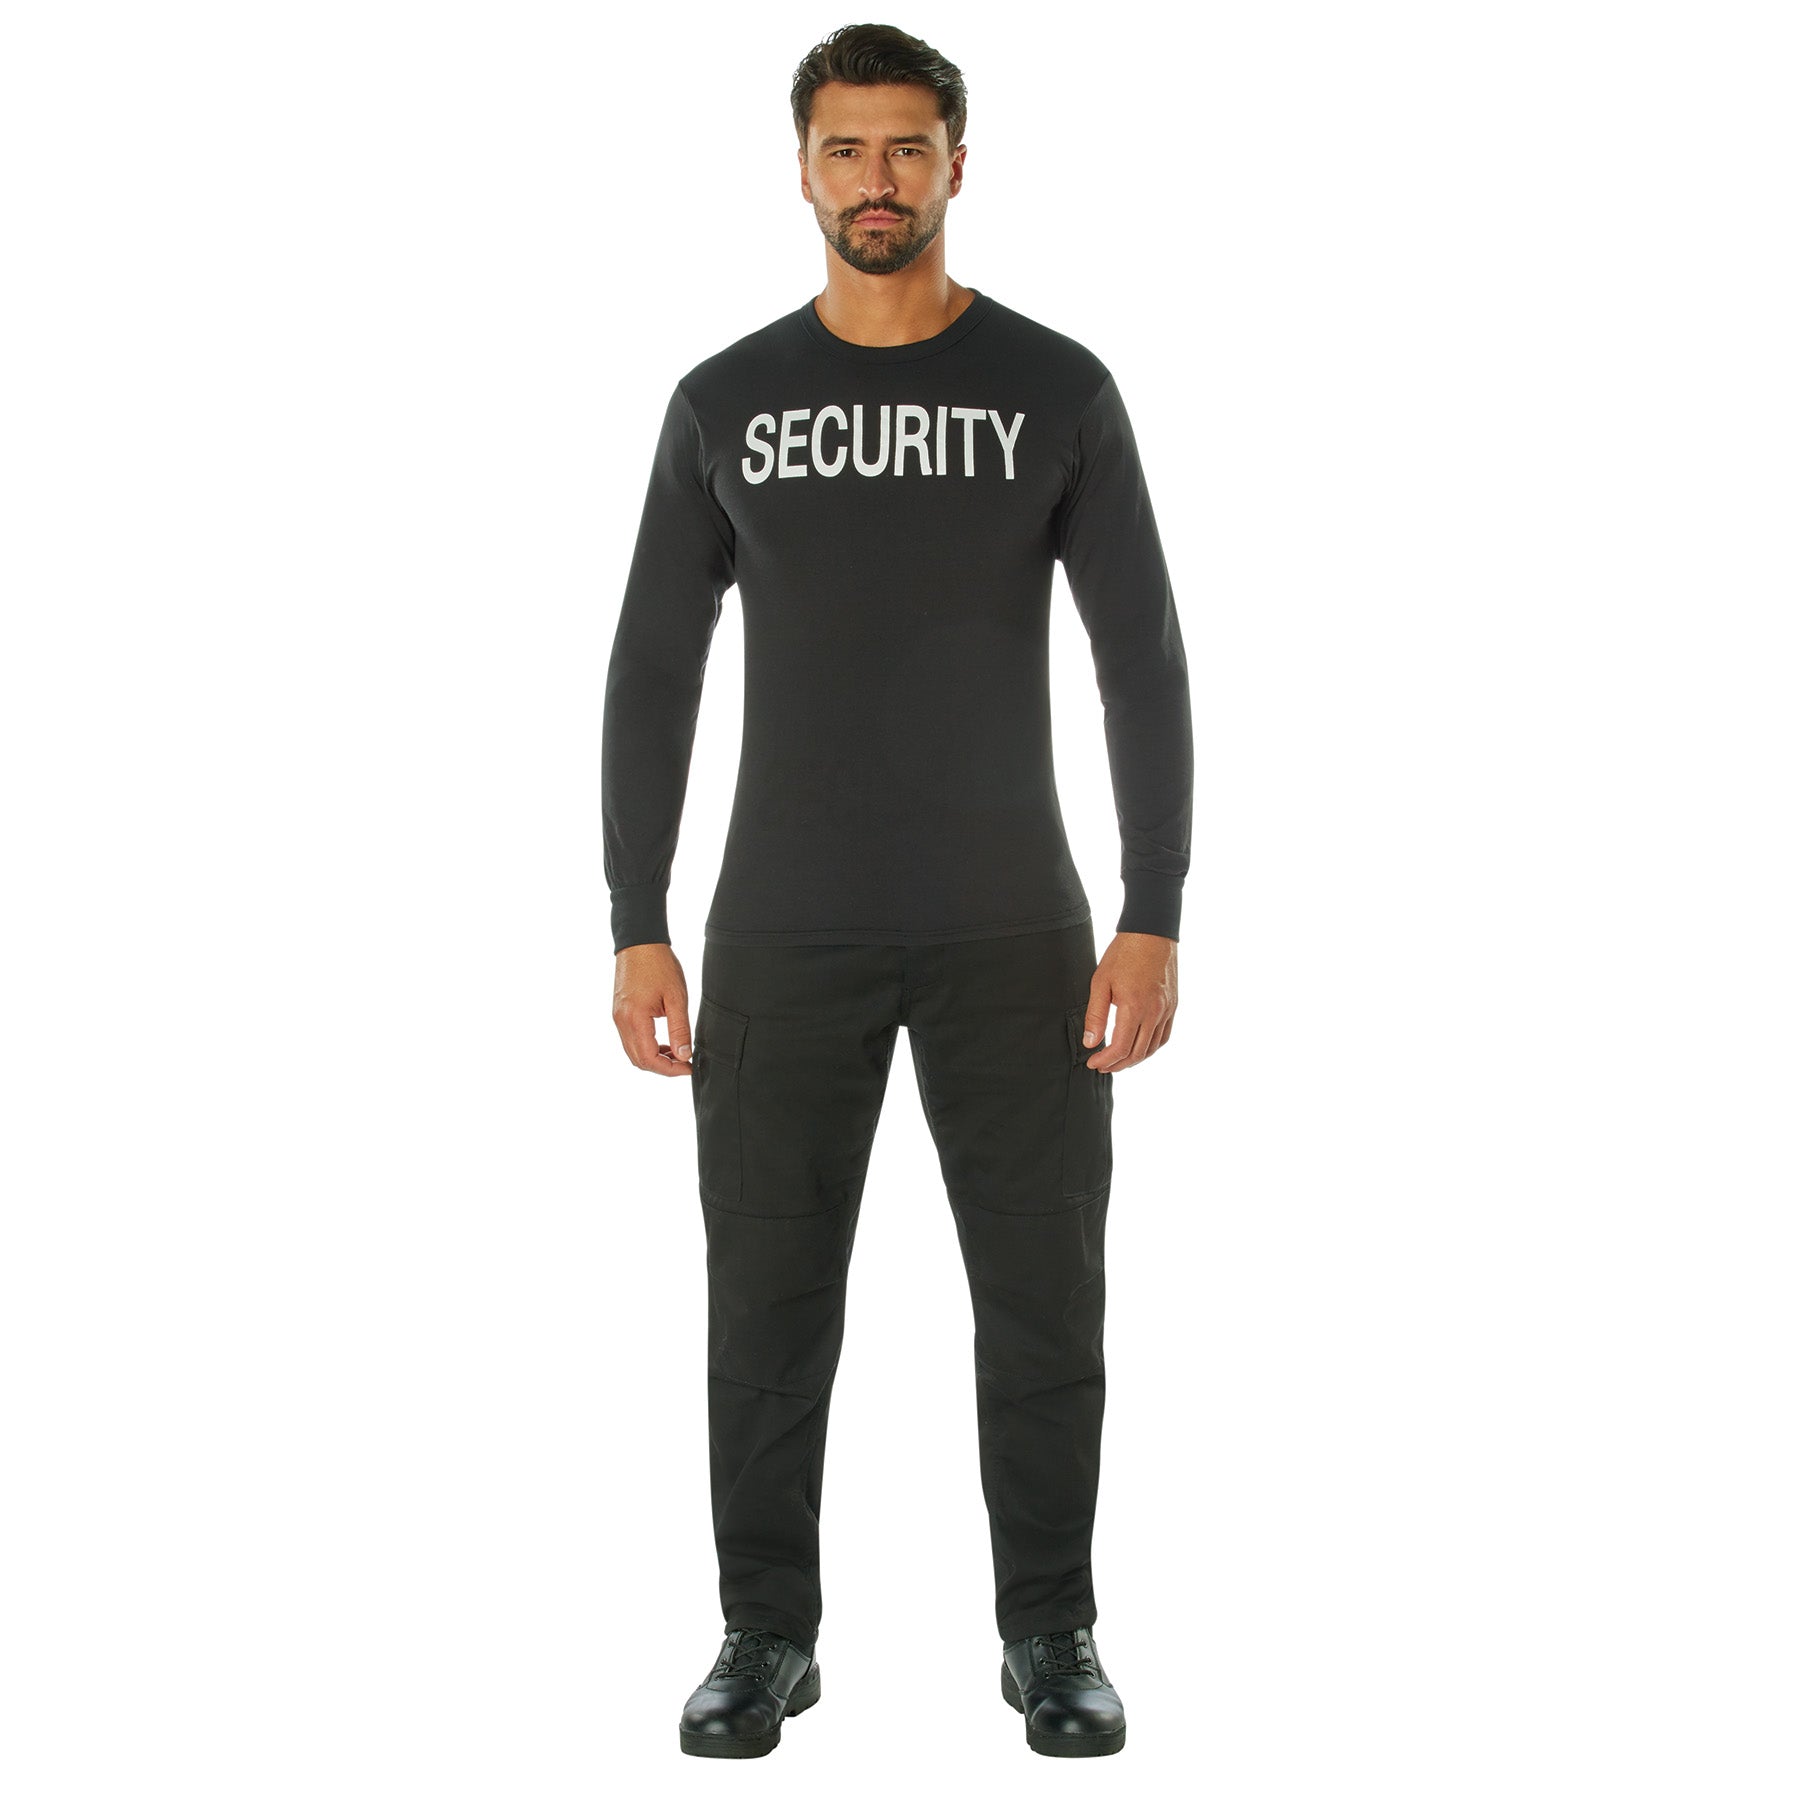 [Public Safety] Poly/Cotton 2-Sided Security Long Sleeve Shirts